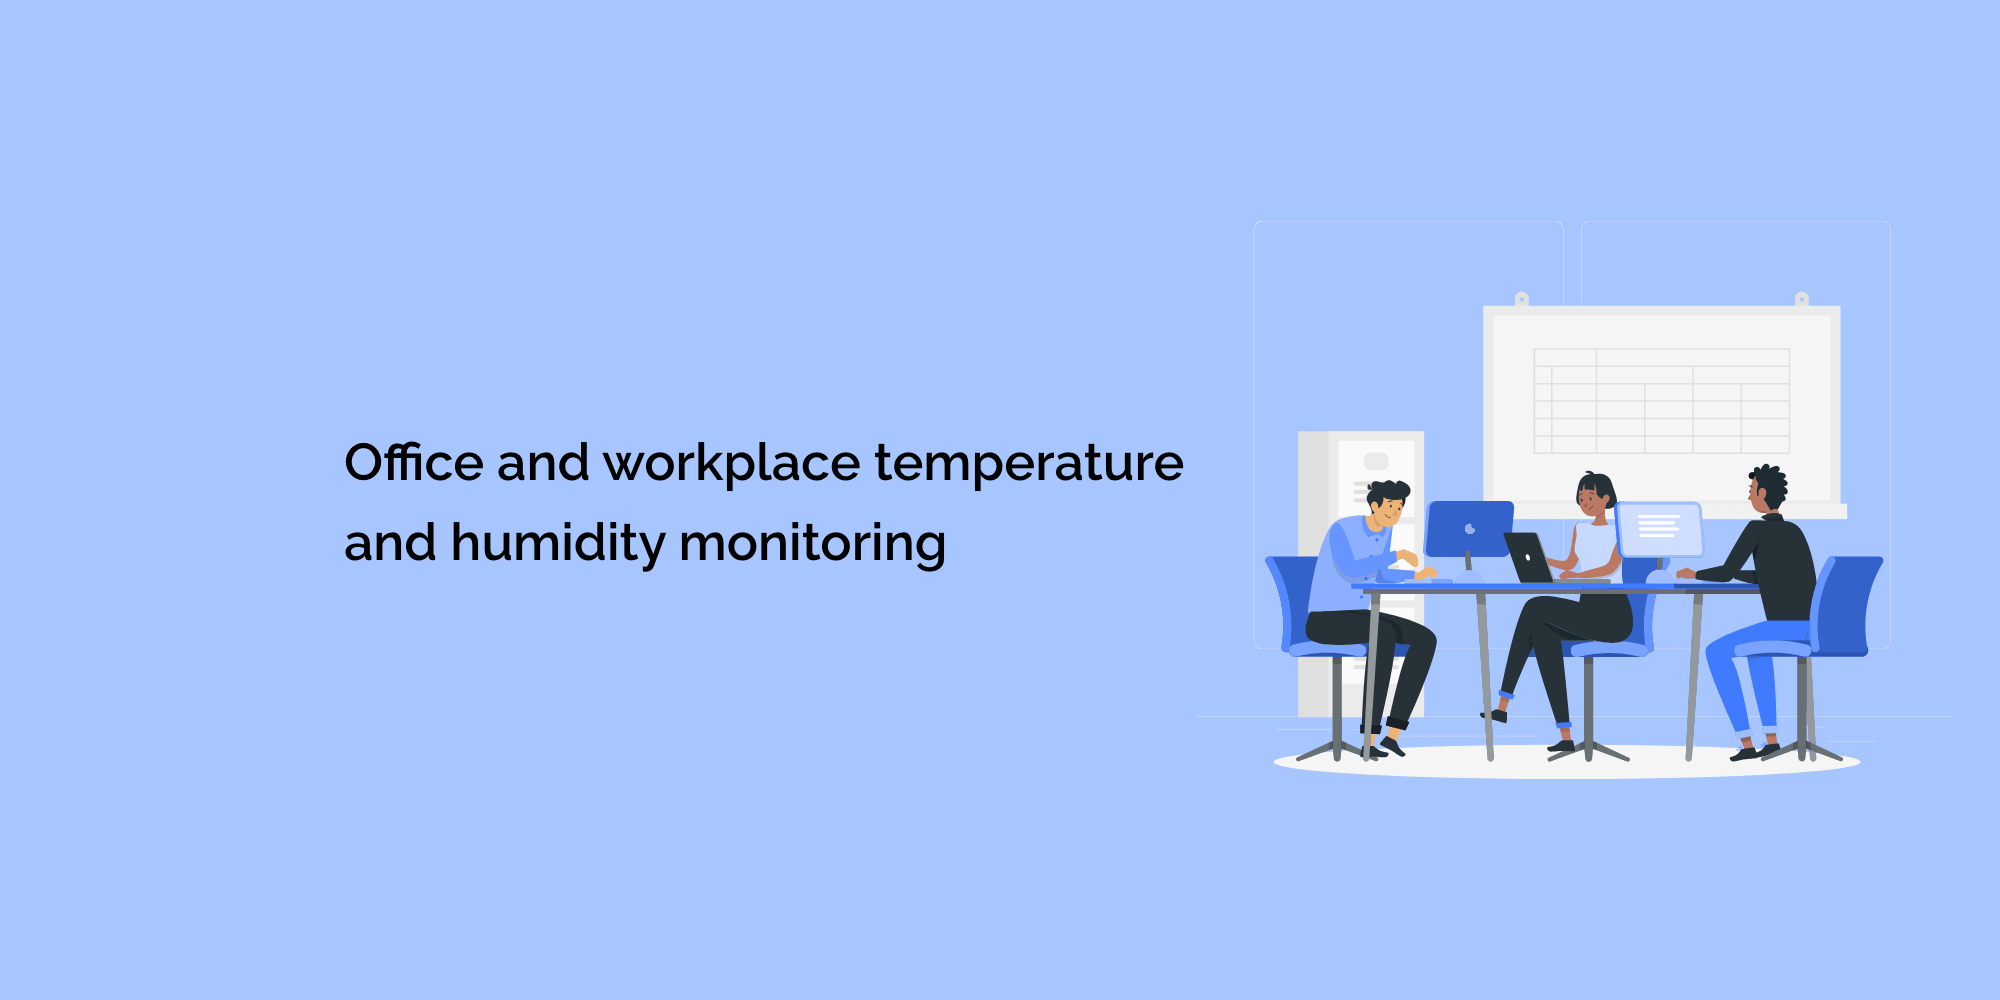 Office and workplace temperature and humidity monitoring